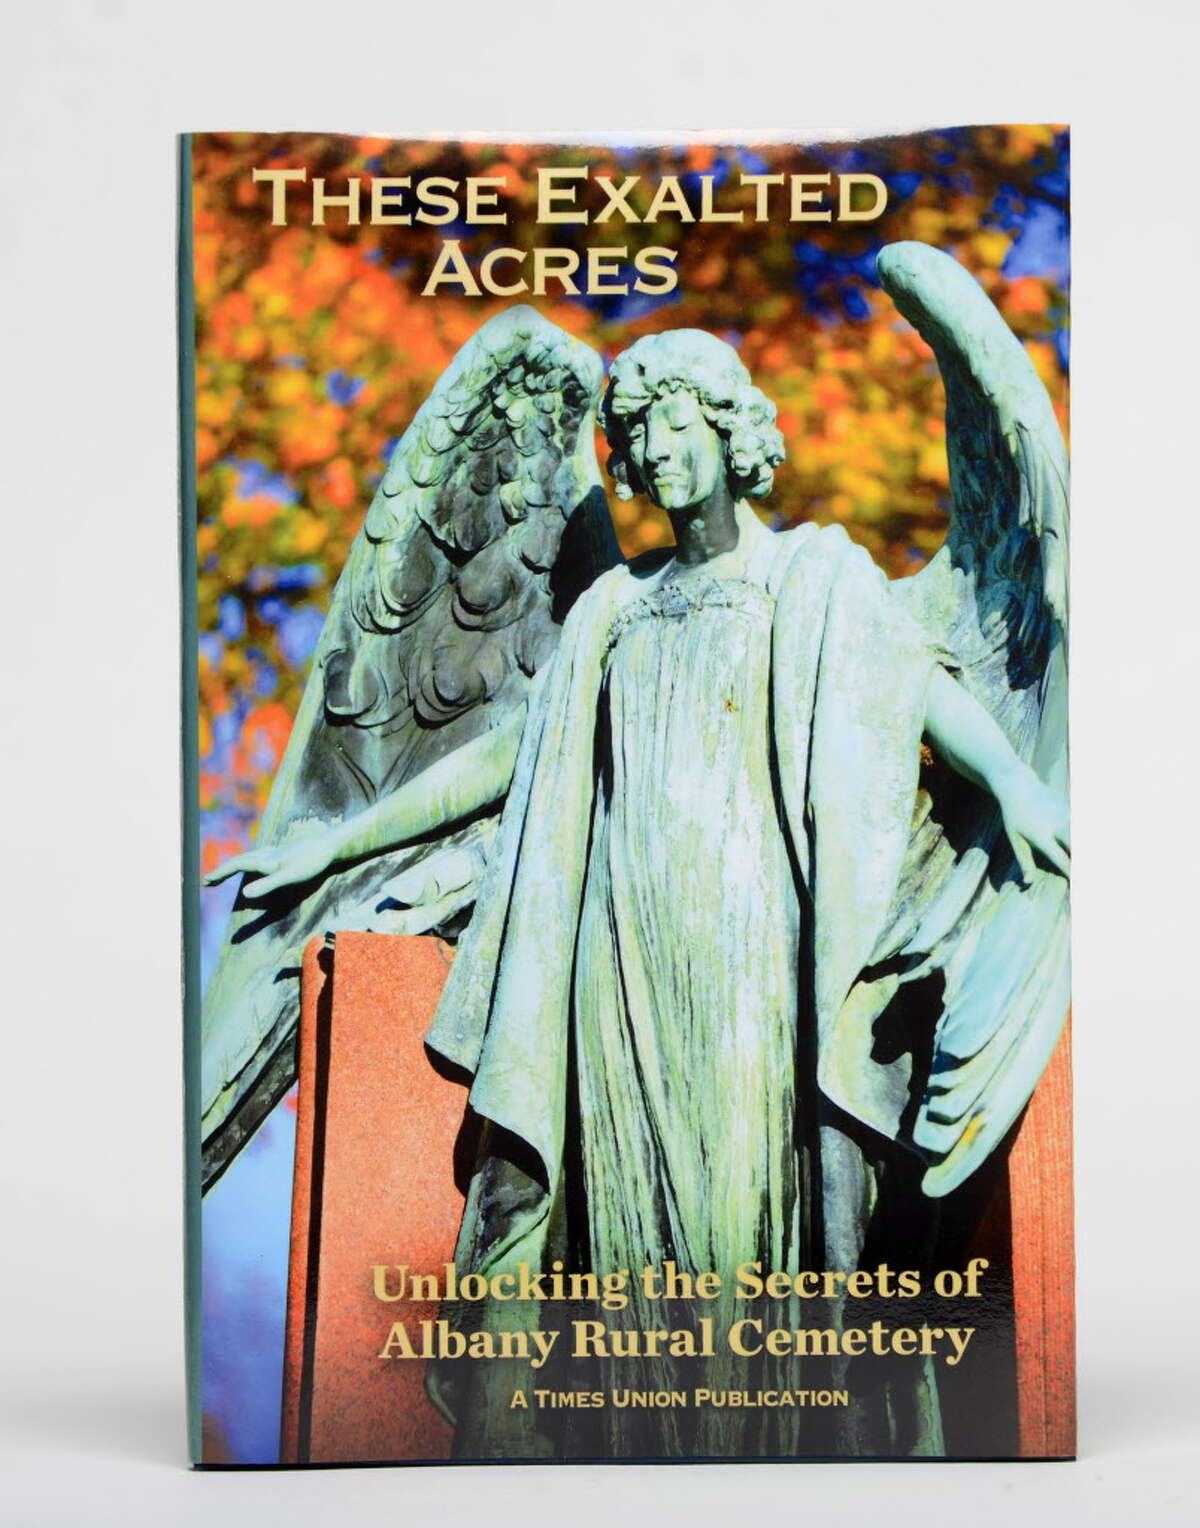 "These Exalted Acres" book cover Tuesday, May 19, 2015, at the Times Union in Colonie, N.Y. (Will Waldron/Times Union)